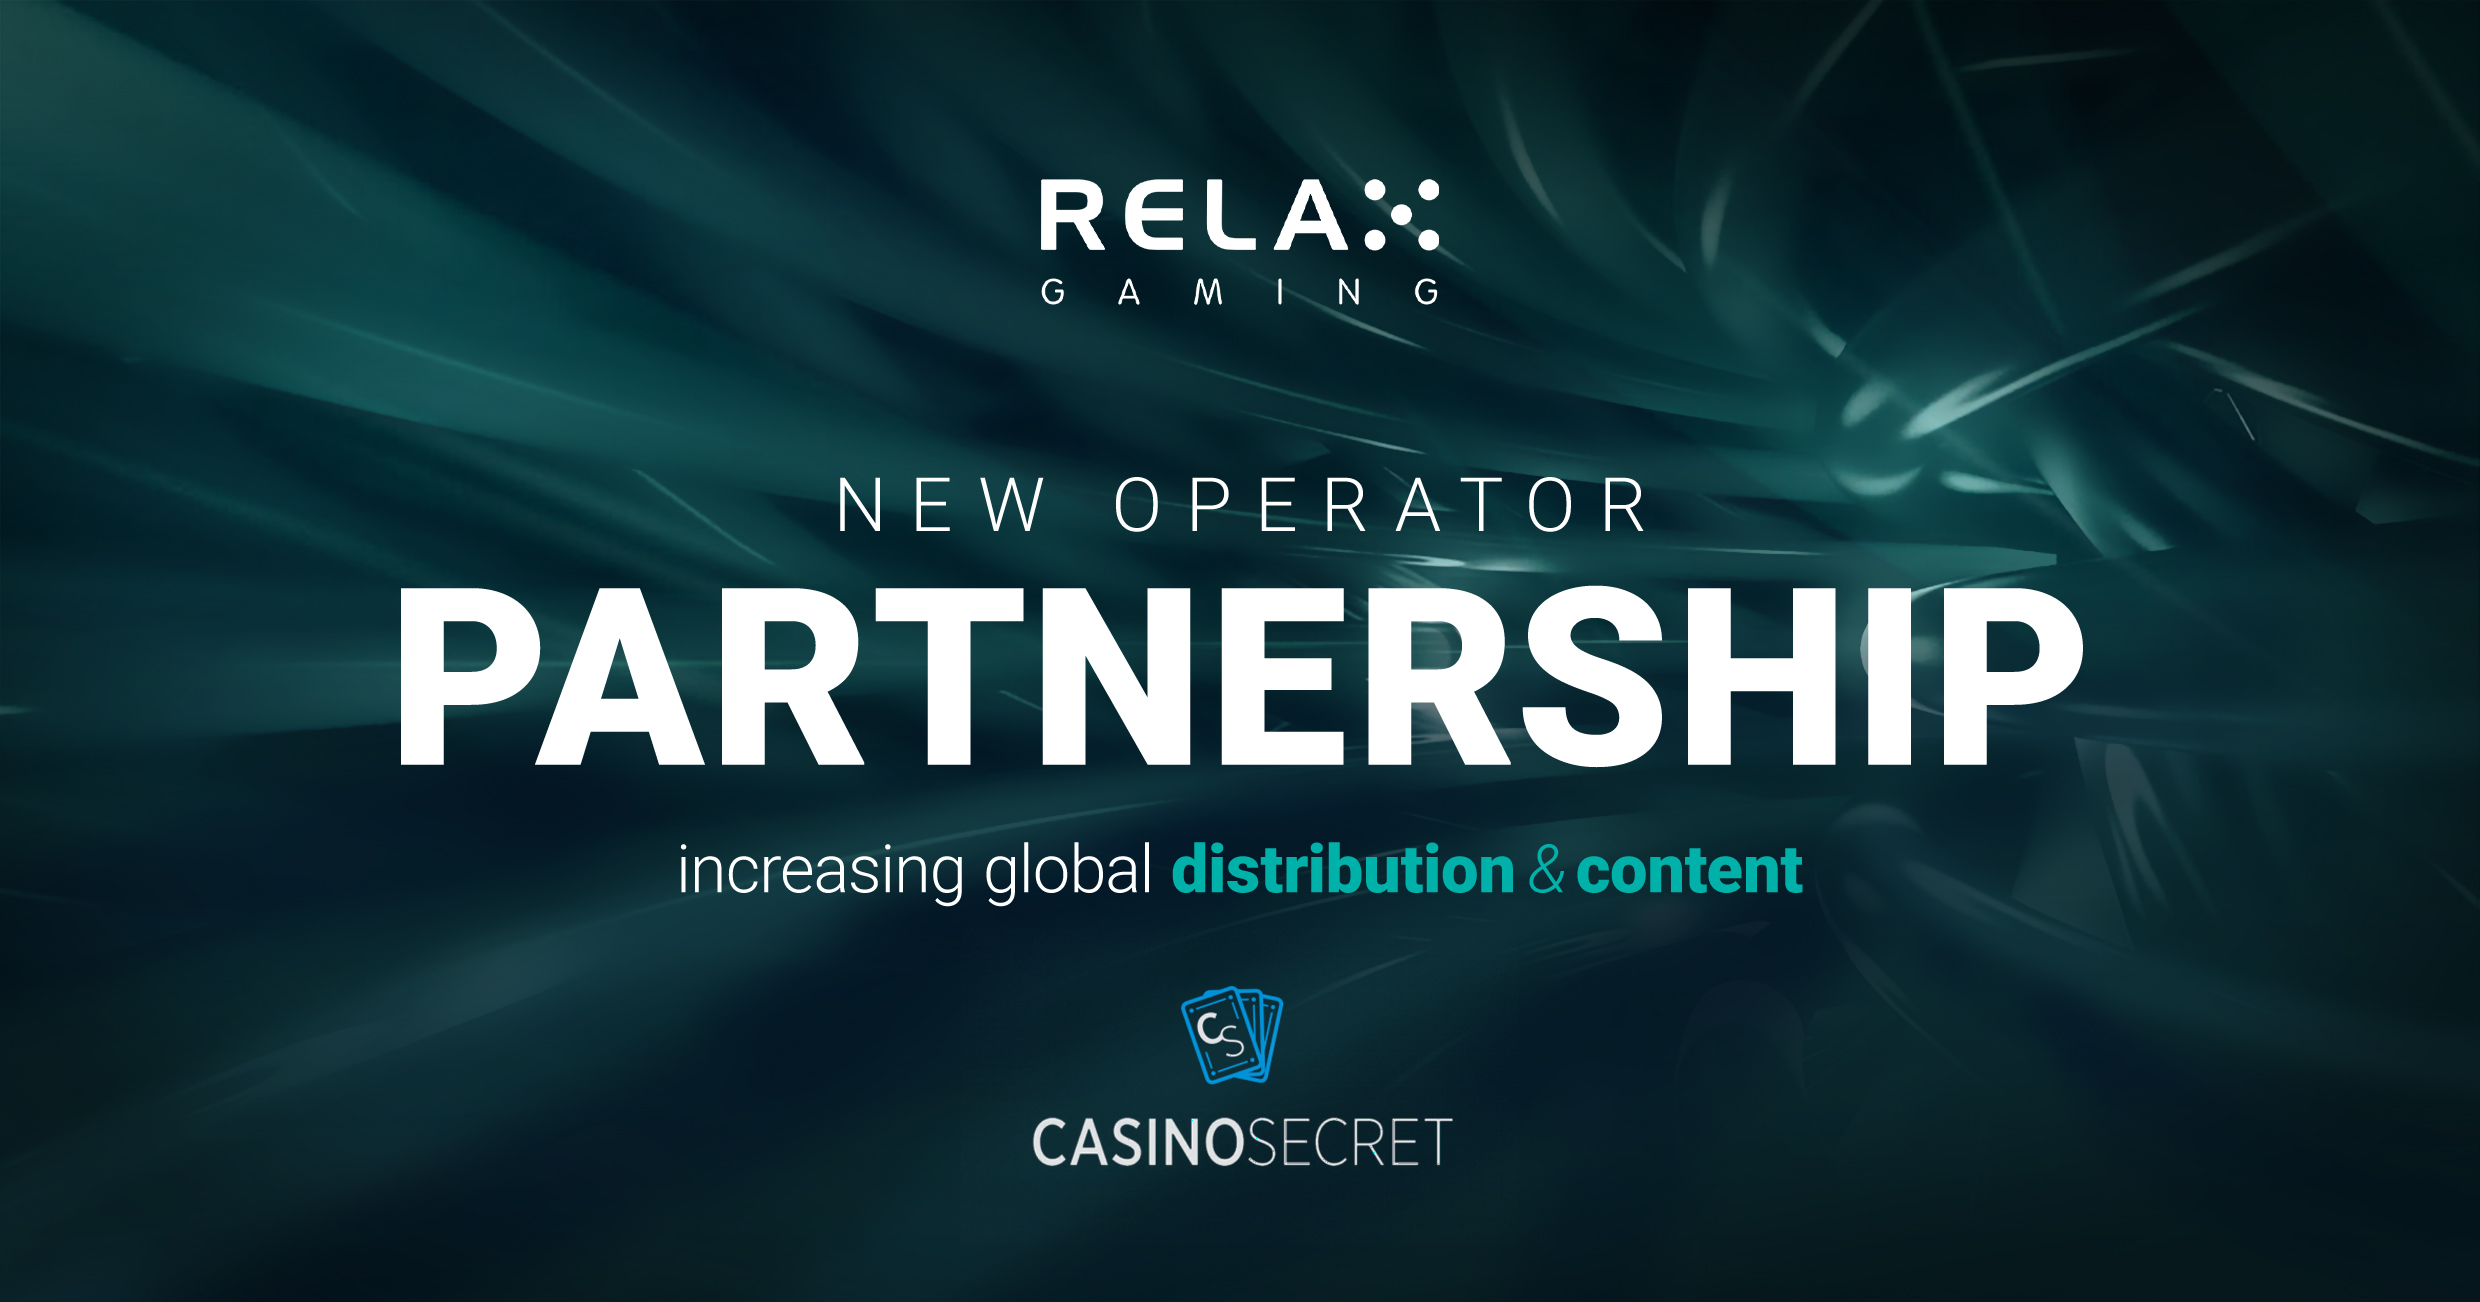 Relax Gaming teams up with CasinoSecret